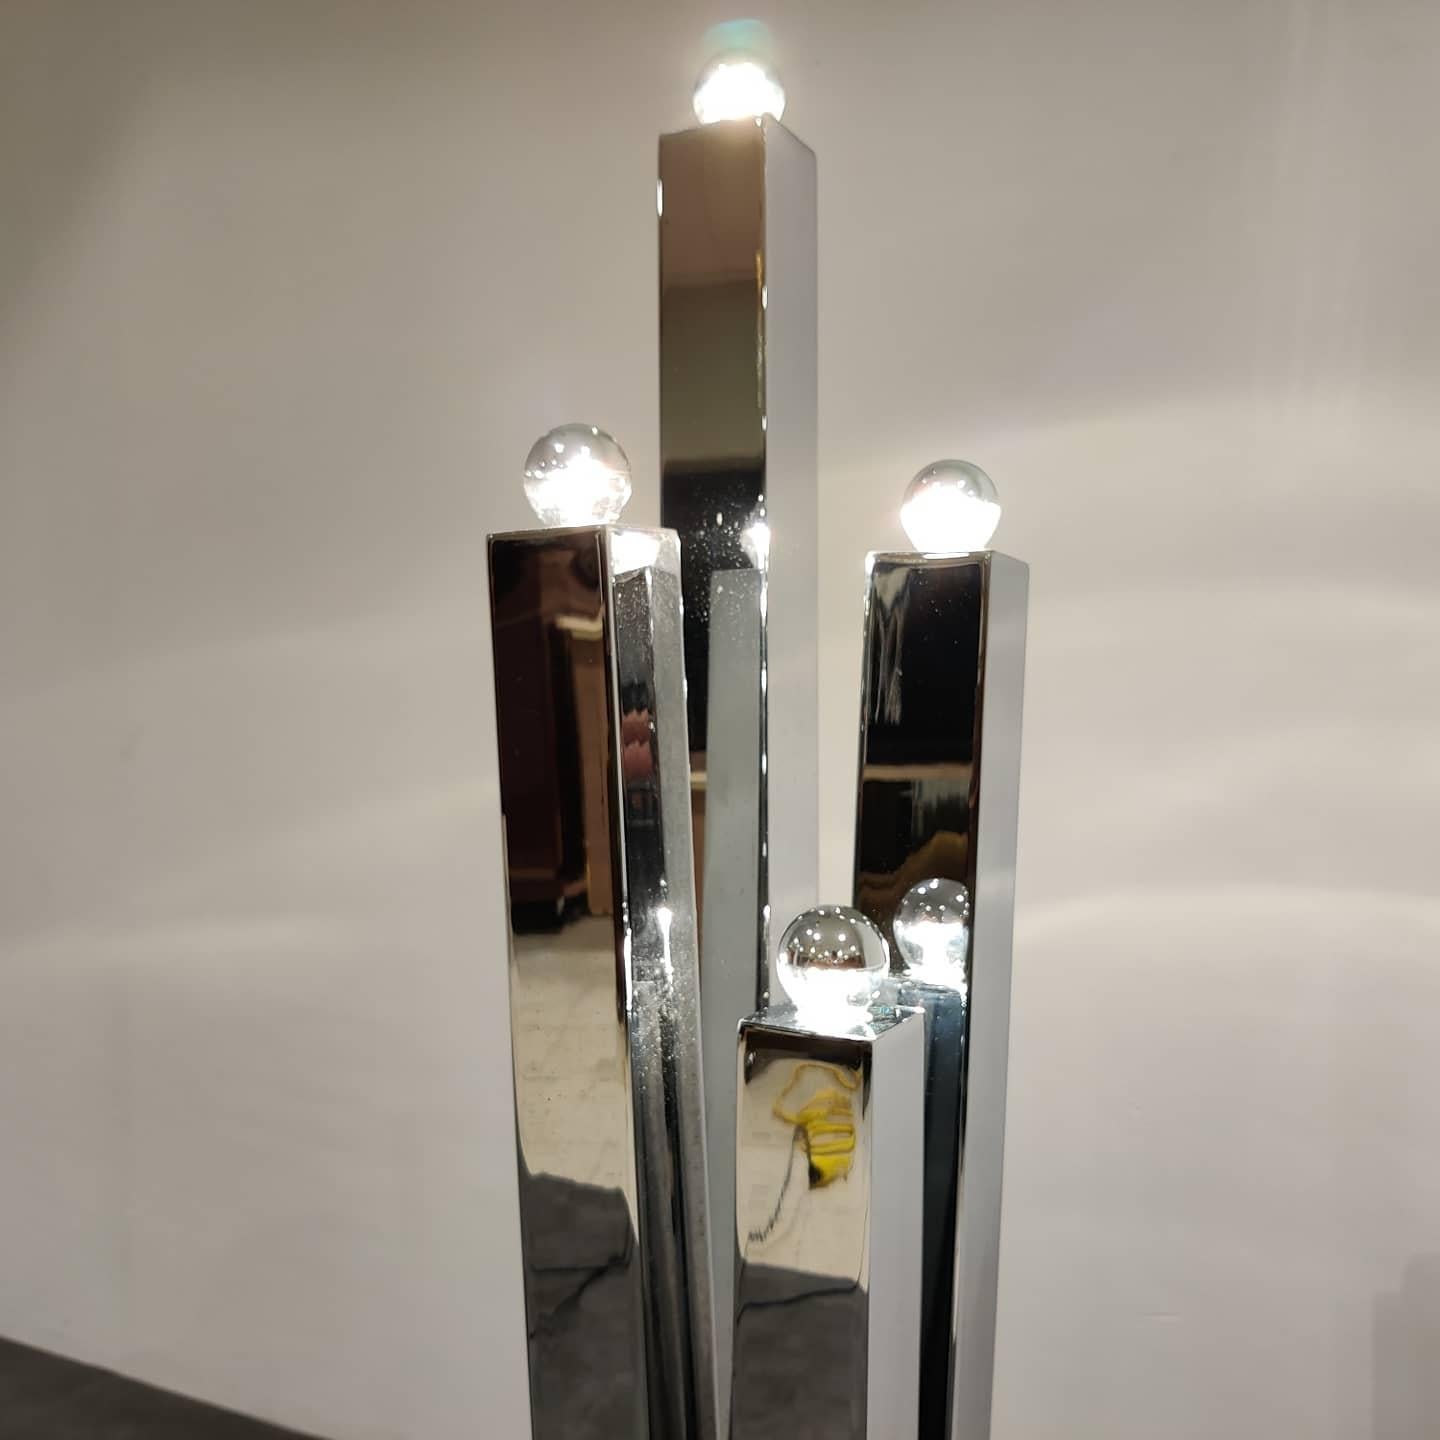 Modernist design chrome floor lamp designed by Gaetano Sciolari.

Beautiful, timeless design.

Notice the fact the arms grow apart, like a bouquet of flowers.

Original foot switch.

Good condition.

Works with regular E14 sized light